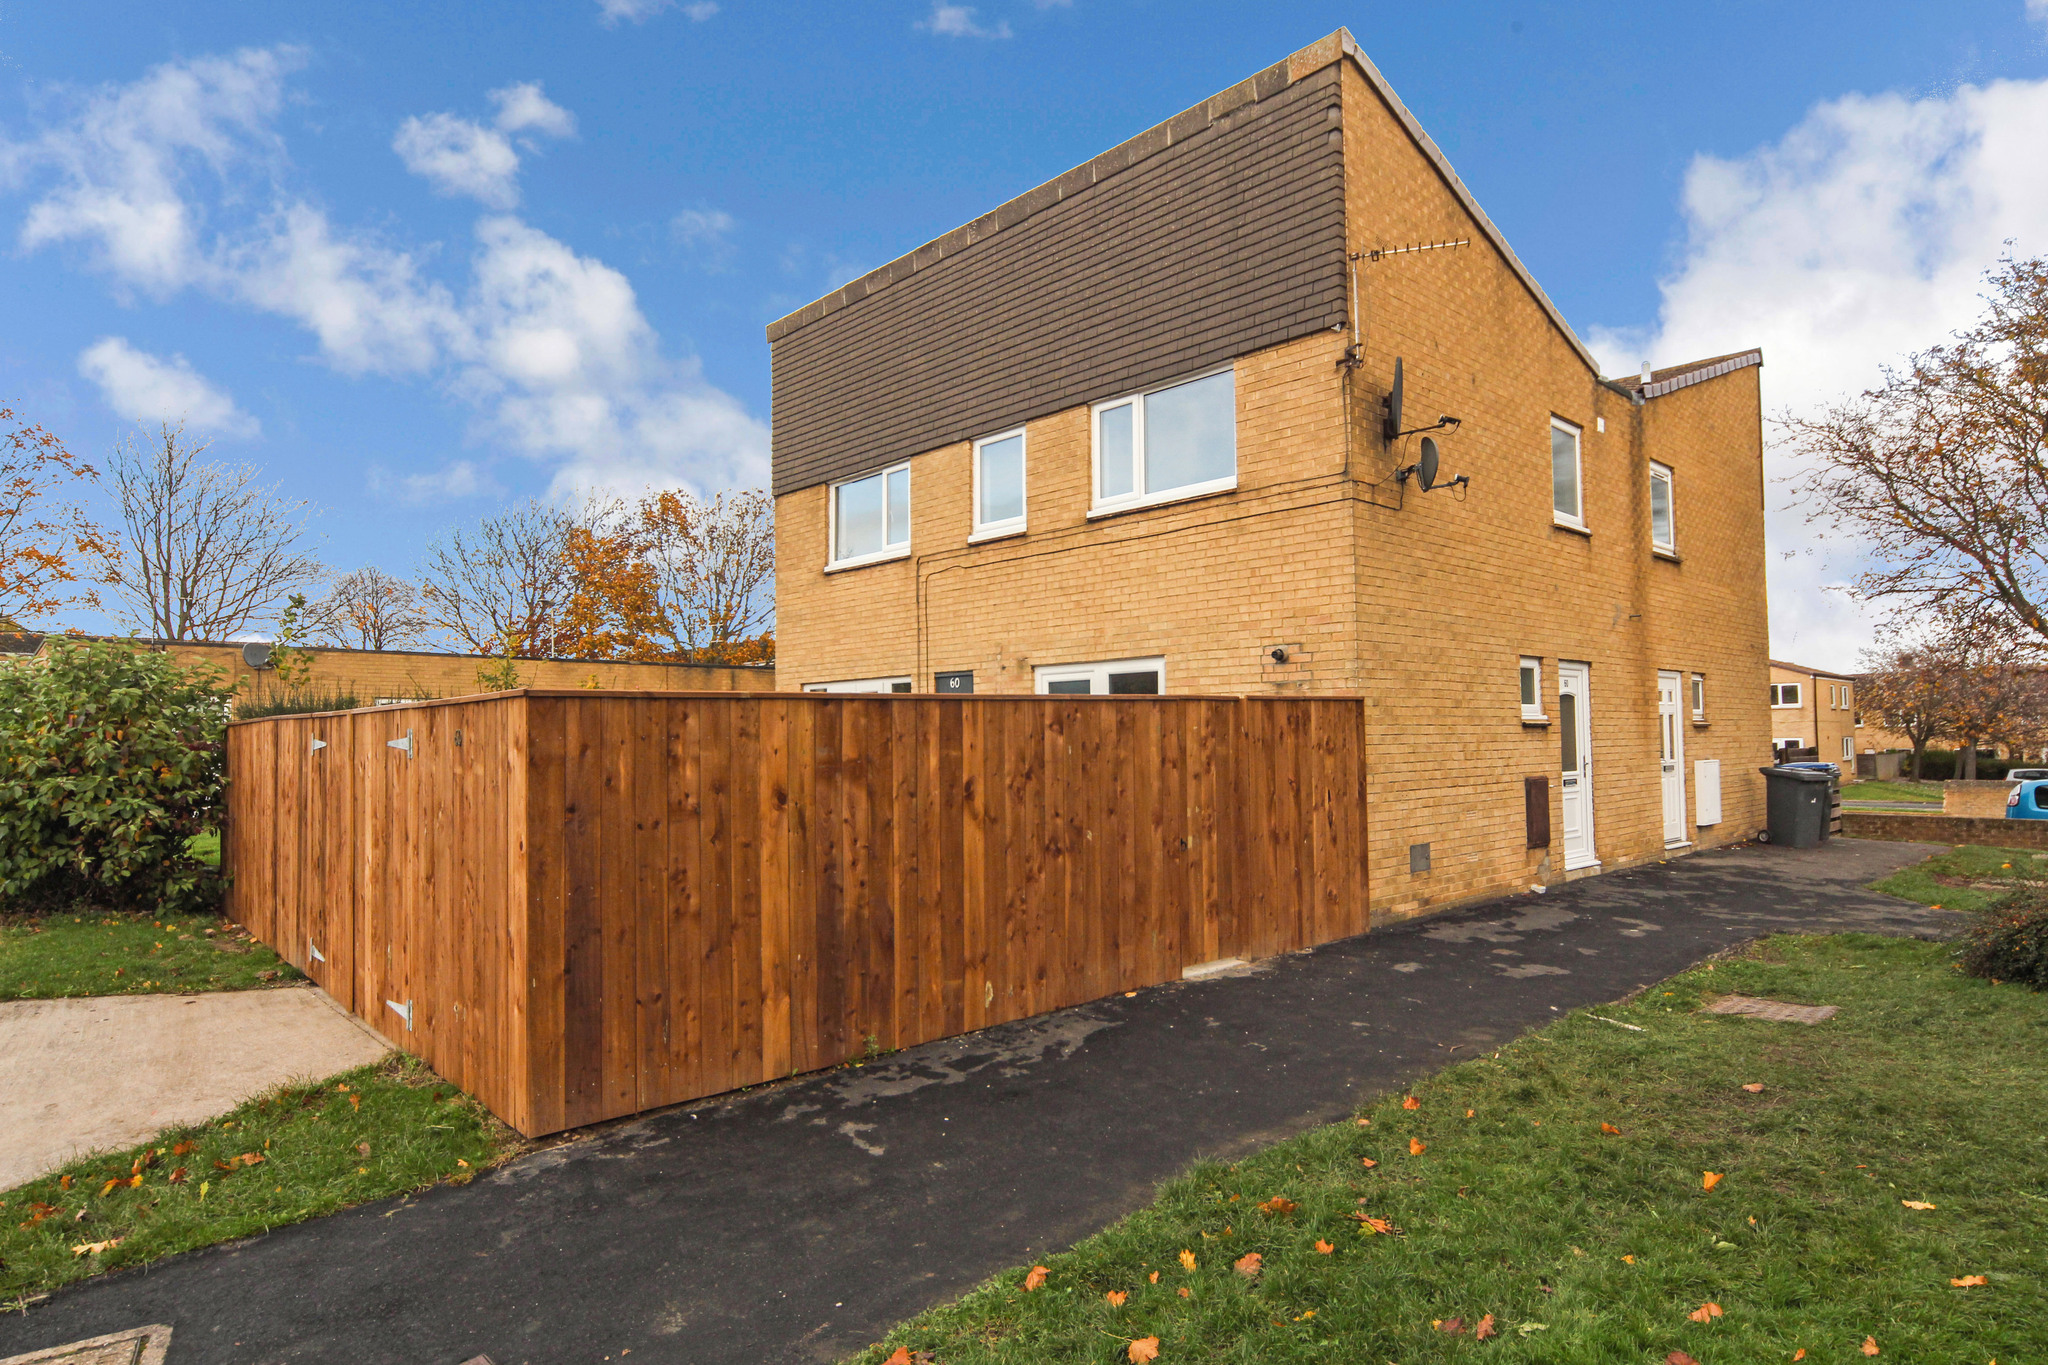 4 bed End of Terrace for rent in Newton Aycliffe. From Aycliffe Homes - Newton Aycliffe